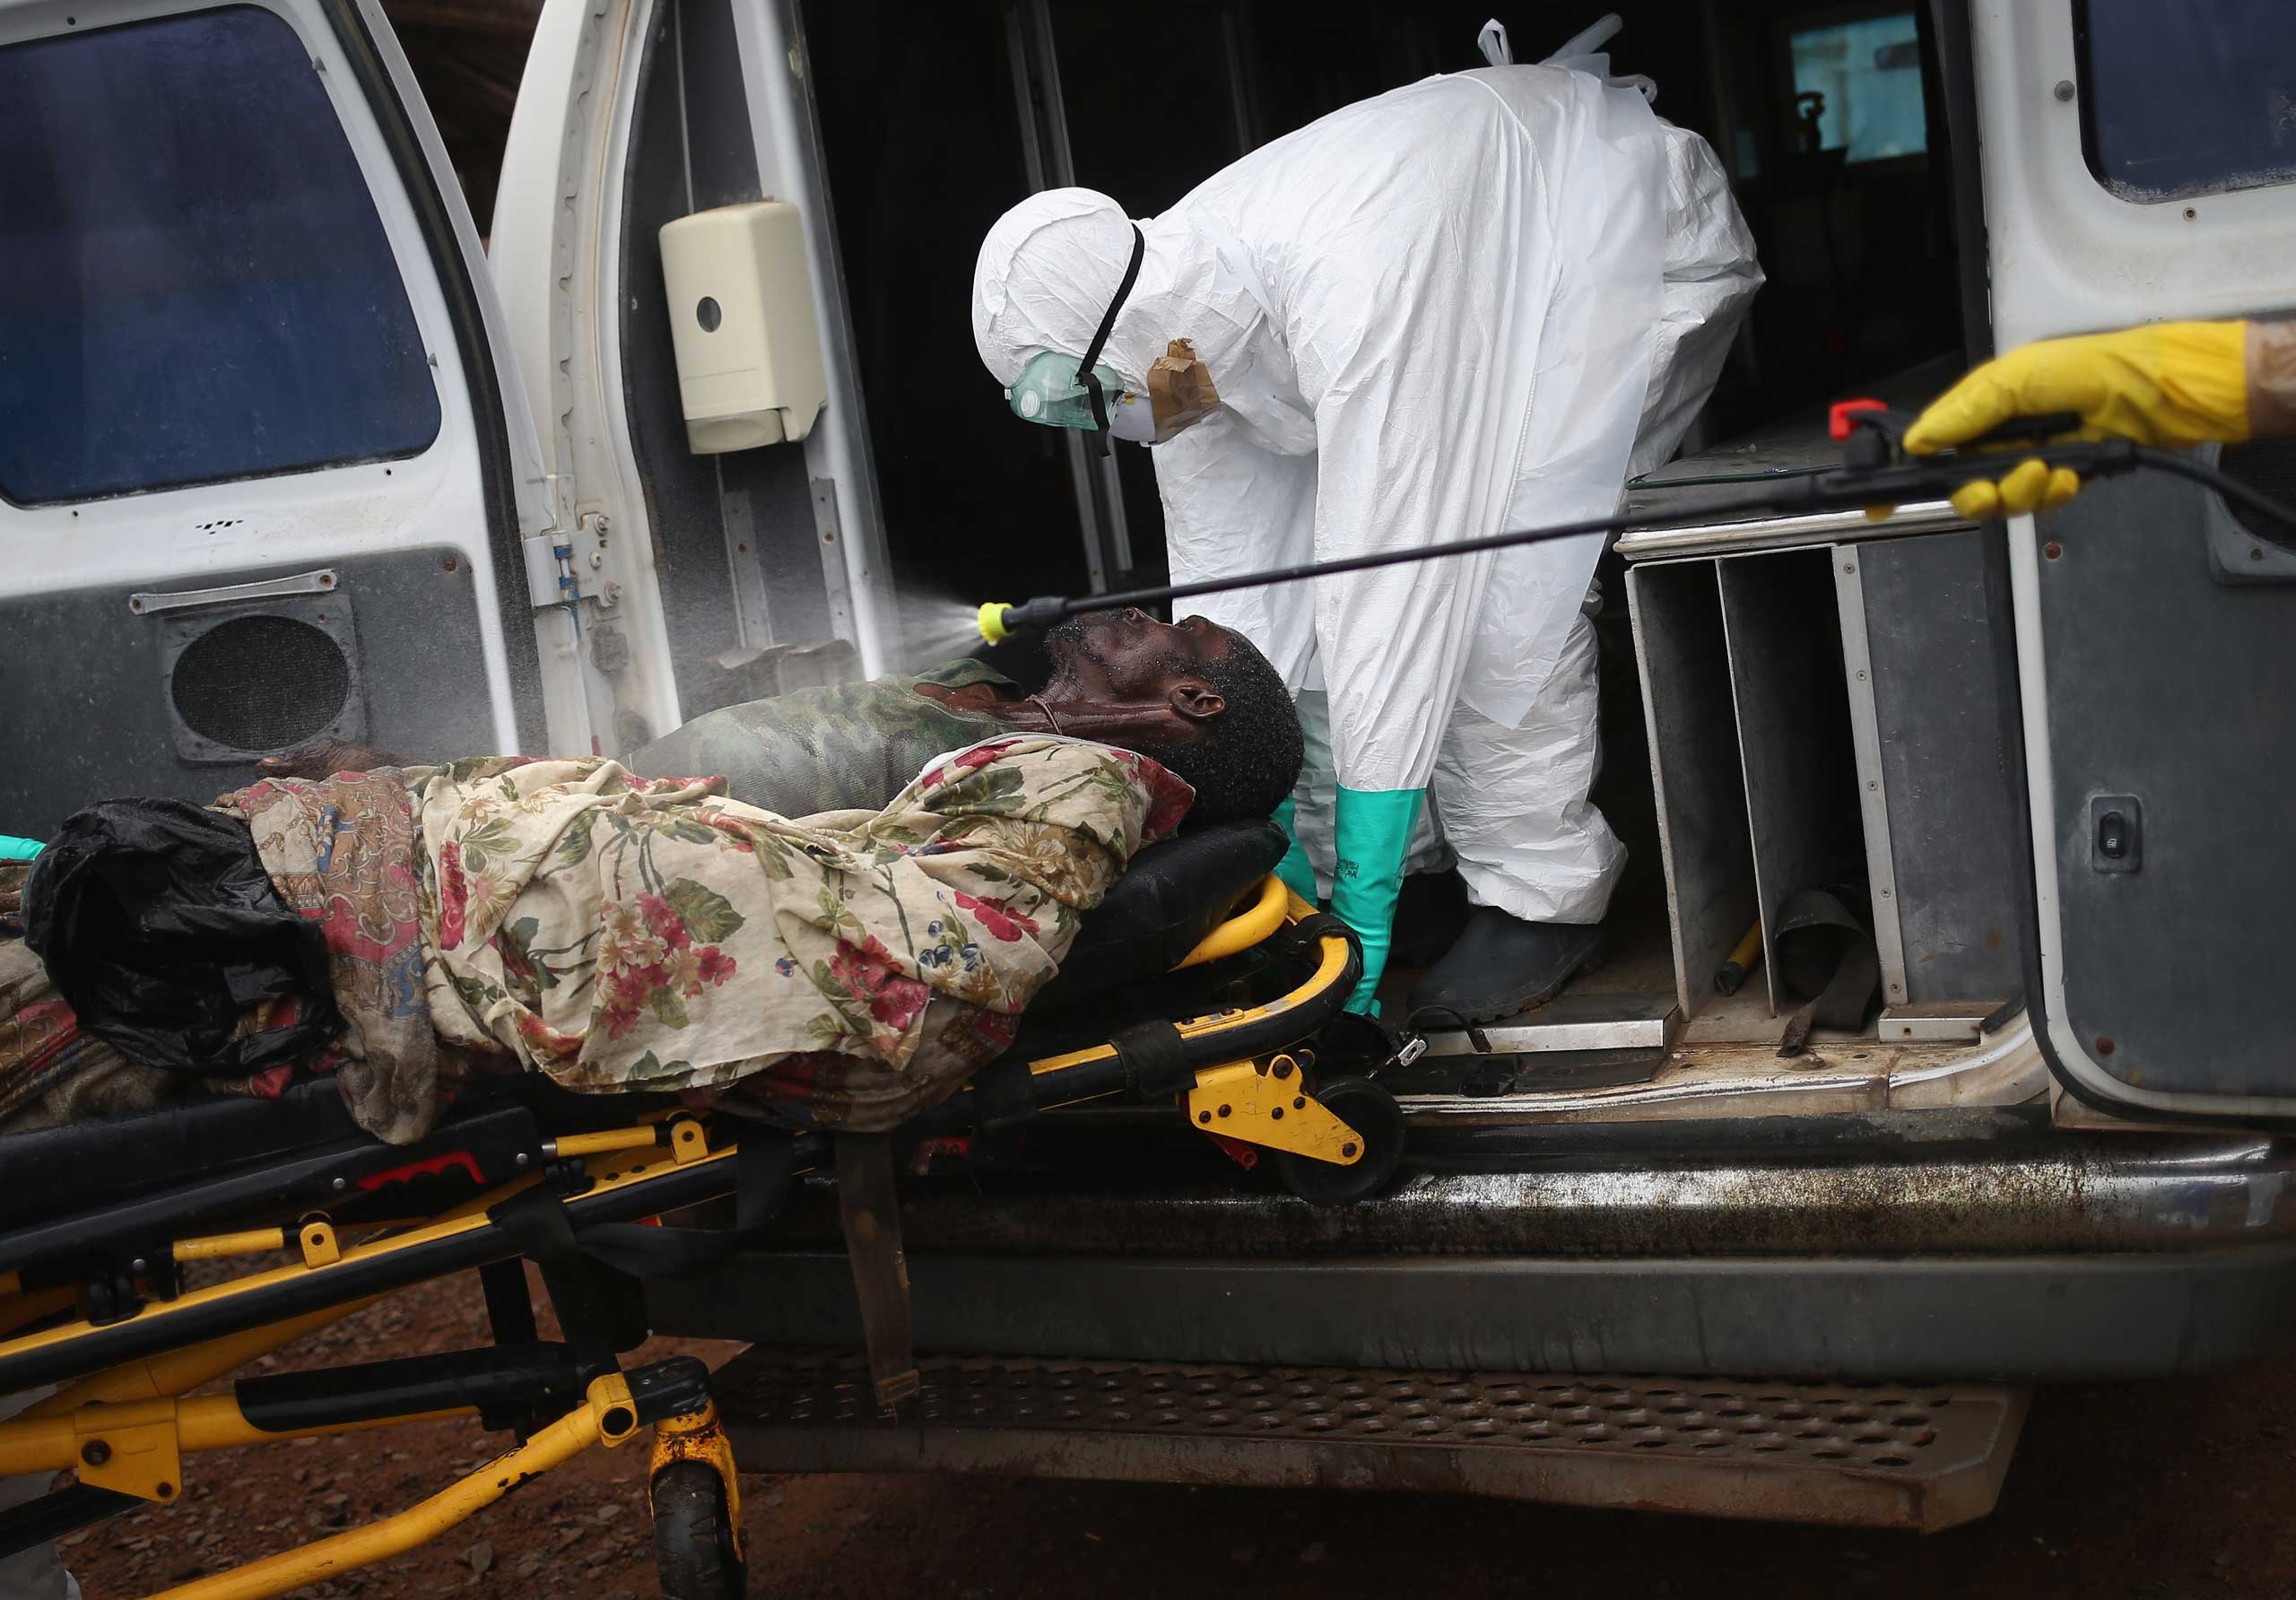 A burial team disinfects an Ebola victim while collecting him for cremation on Oct. 2, 2014 in Monrovia, Liberia. (John Moore—Getty Images)